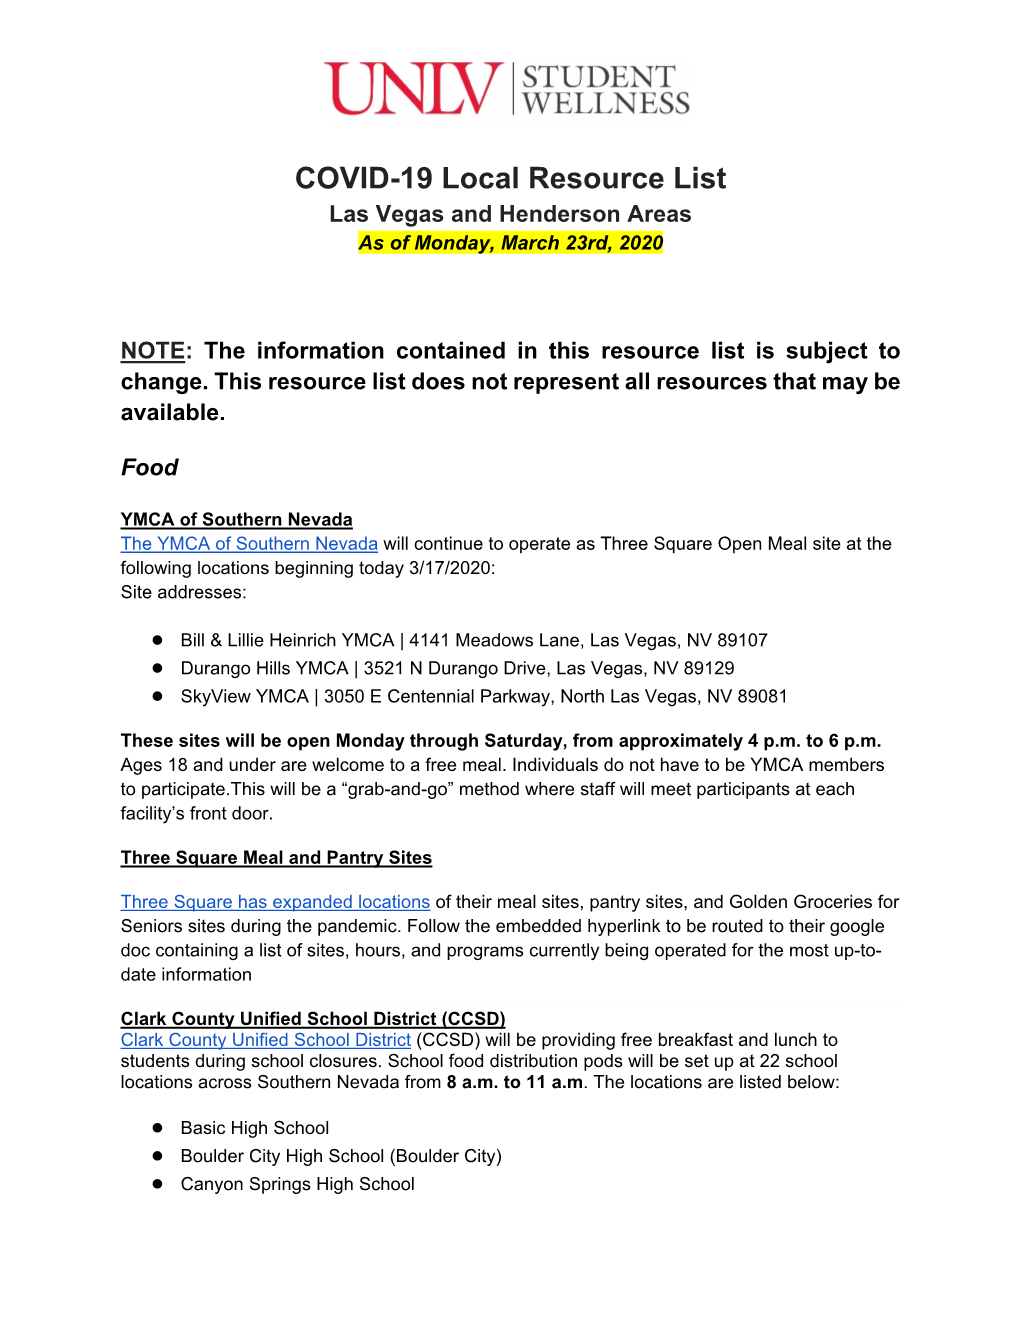 COVID-19 Local Resource List Las Vegas and Henderson Areas As of Monday, March 23Rd, 2020